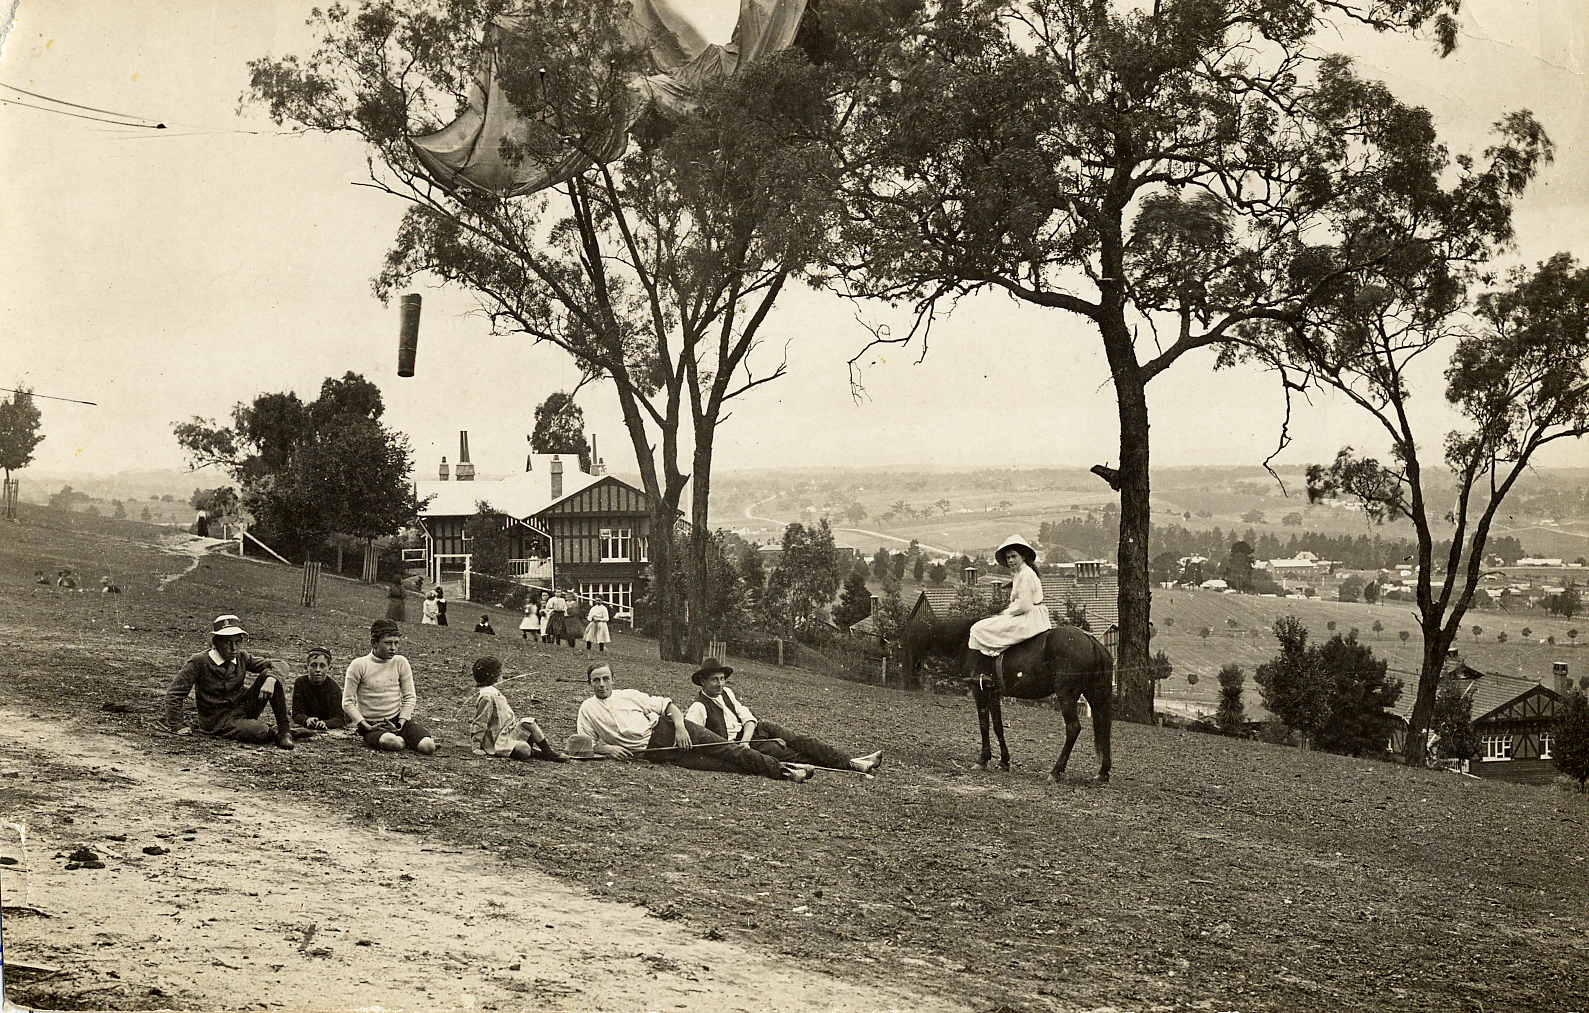 <em>Eaglemont with Desbrowe-Annear houses in background</em>, early 1900s, photograph, 9 x 13.5 cm, Image courtesy of the Heidelberg Historical Society